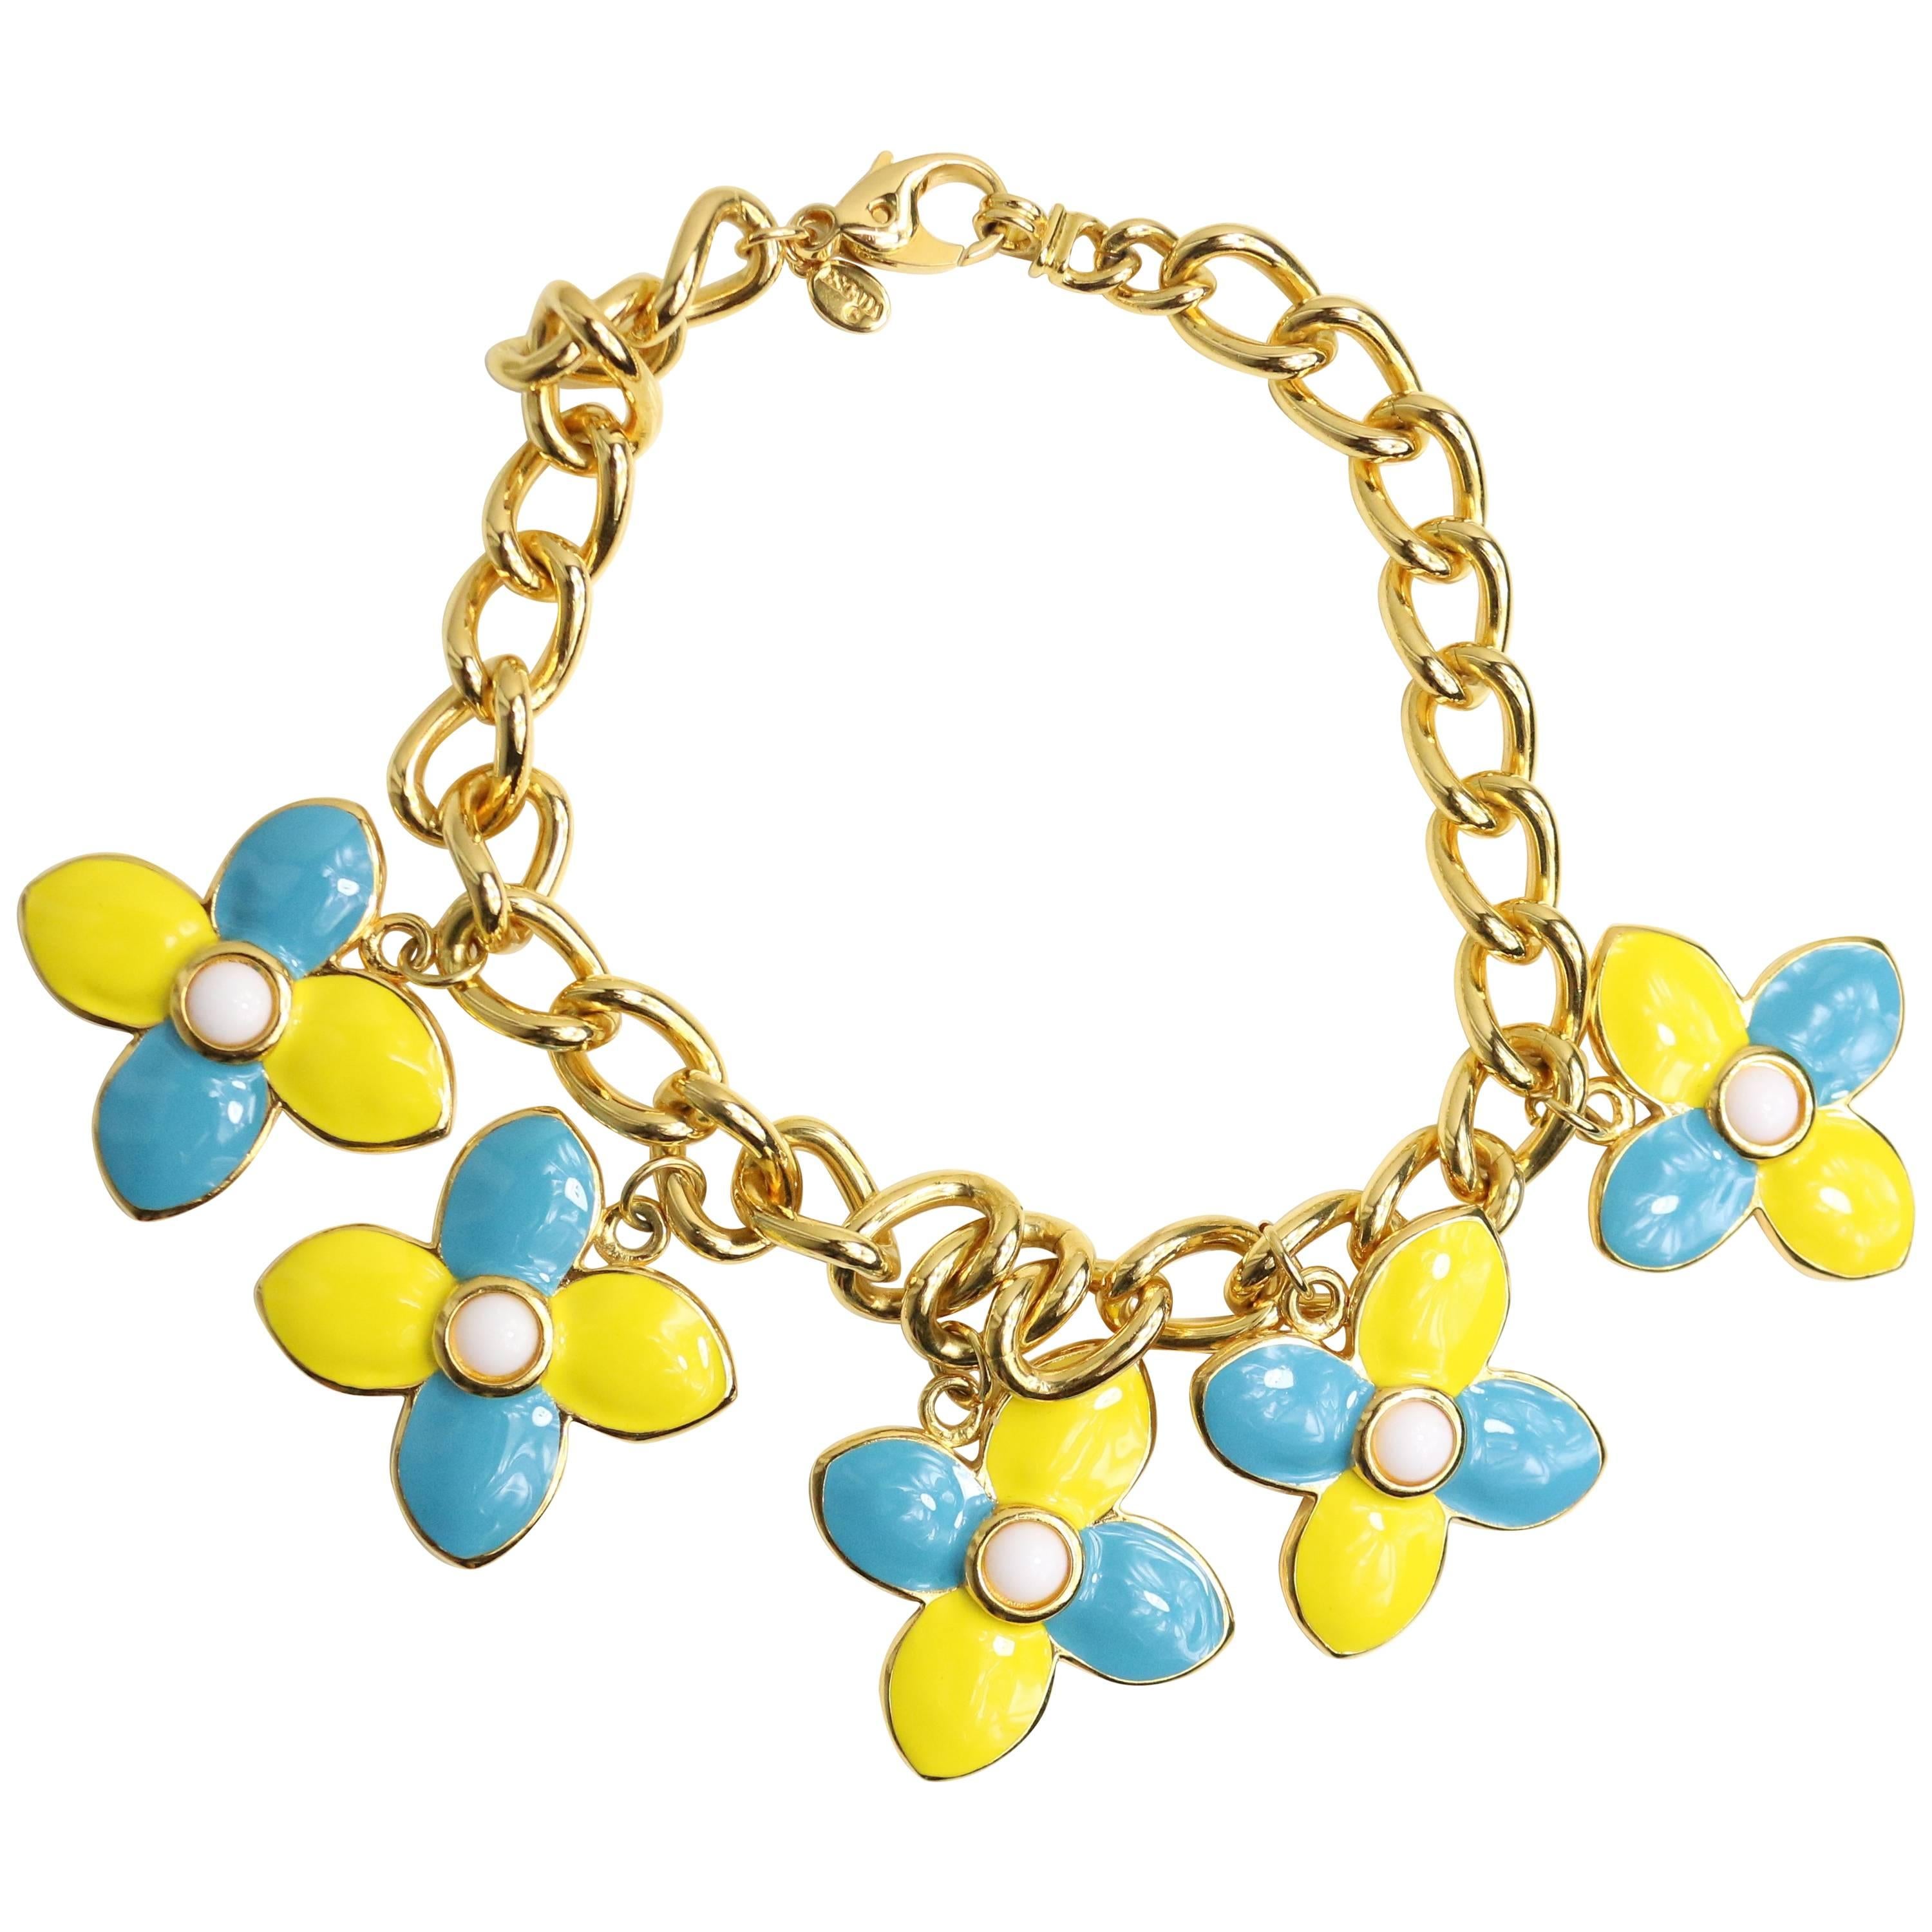 Escada Yellow and Light Blue Clovers Gemstones Gold Chain Necklace